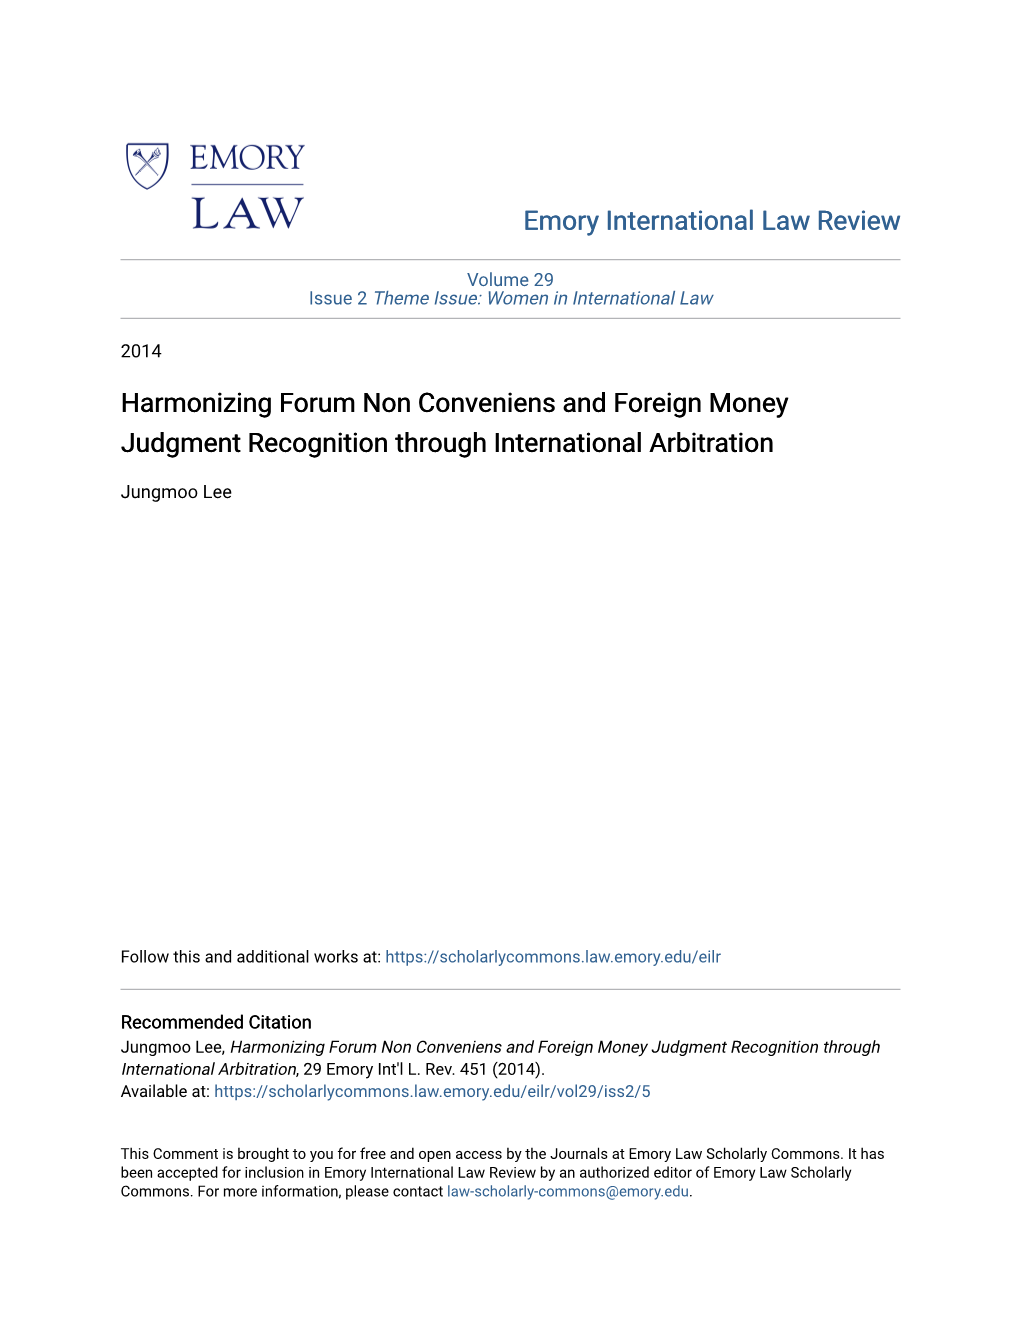 Harmonizing Forum Non Conveniens and Foreign Money Judgment Recognition Through International Arbitration